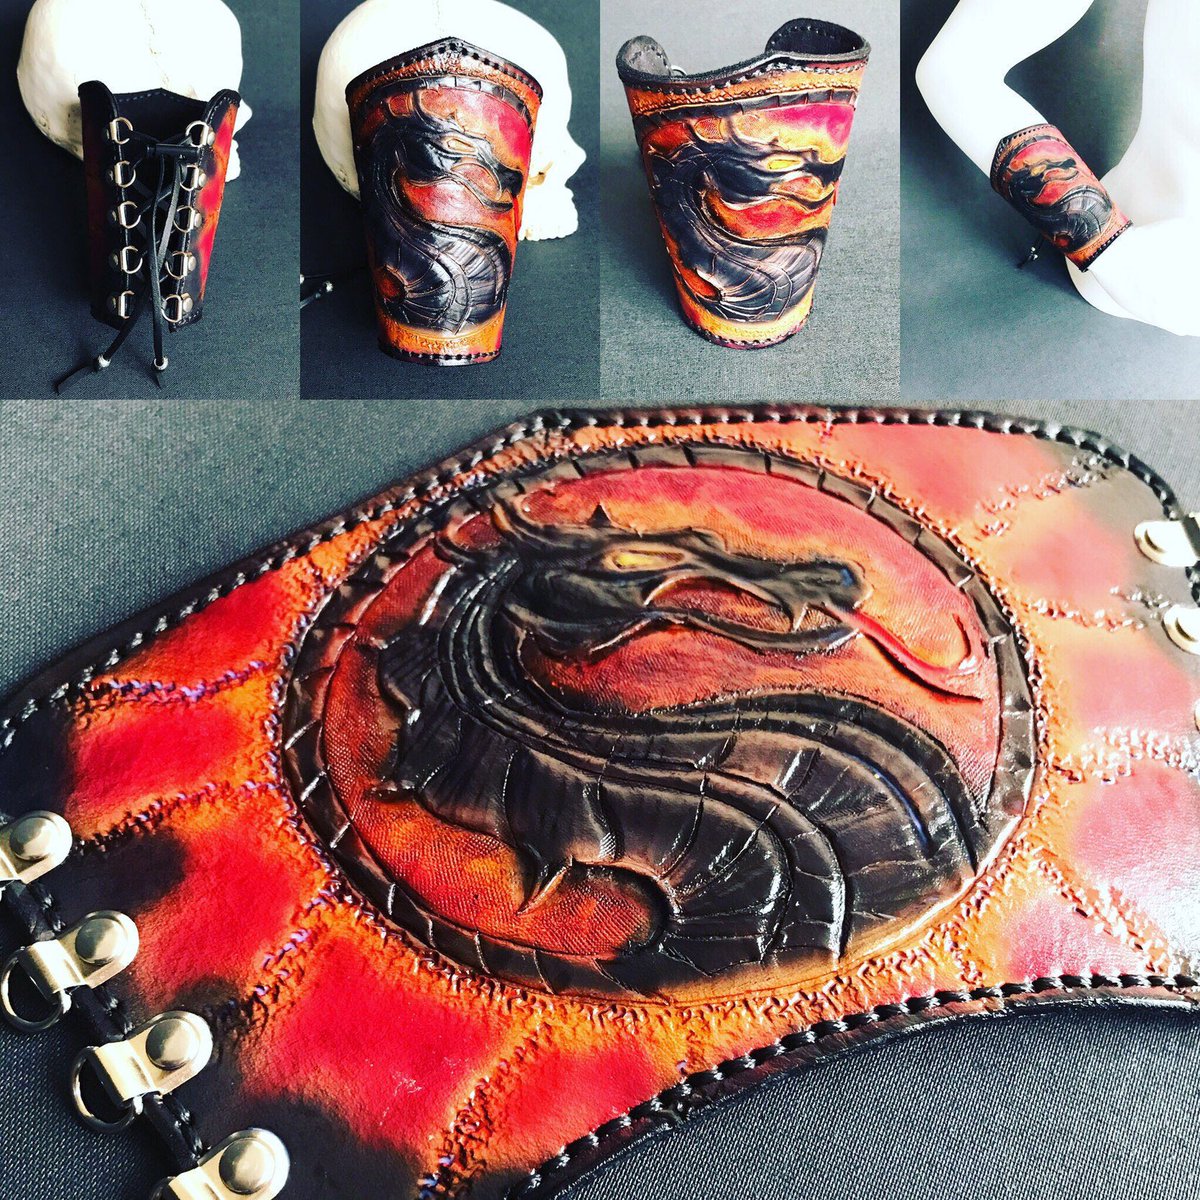 Excited to share this item from my #etsy shop: Dragon Leather Cuff, Leather Bracelet, Leather Arm Guard.. #mortalkombat #dragon #leatherbracelet #leathercuff  etsy.me/2RtxoBs